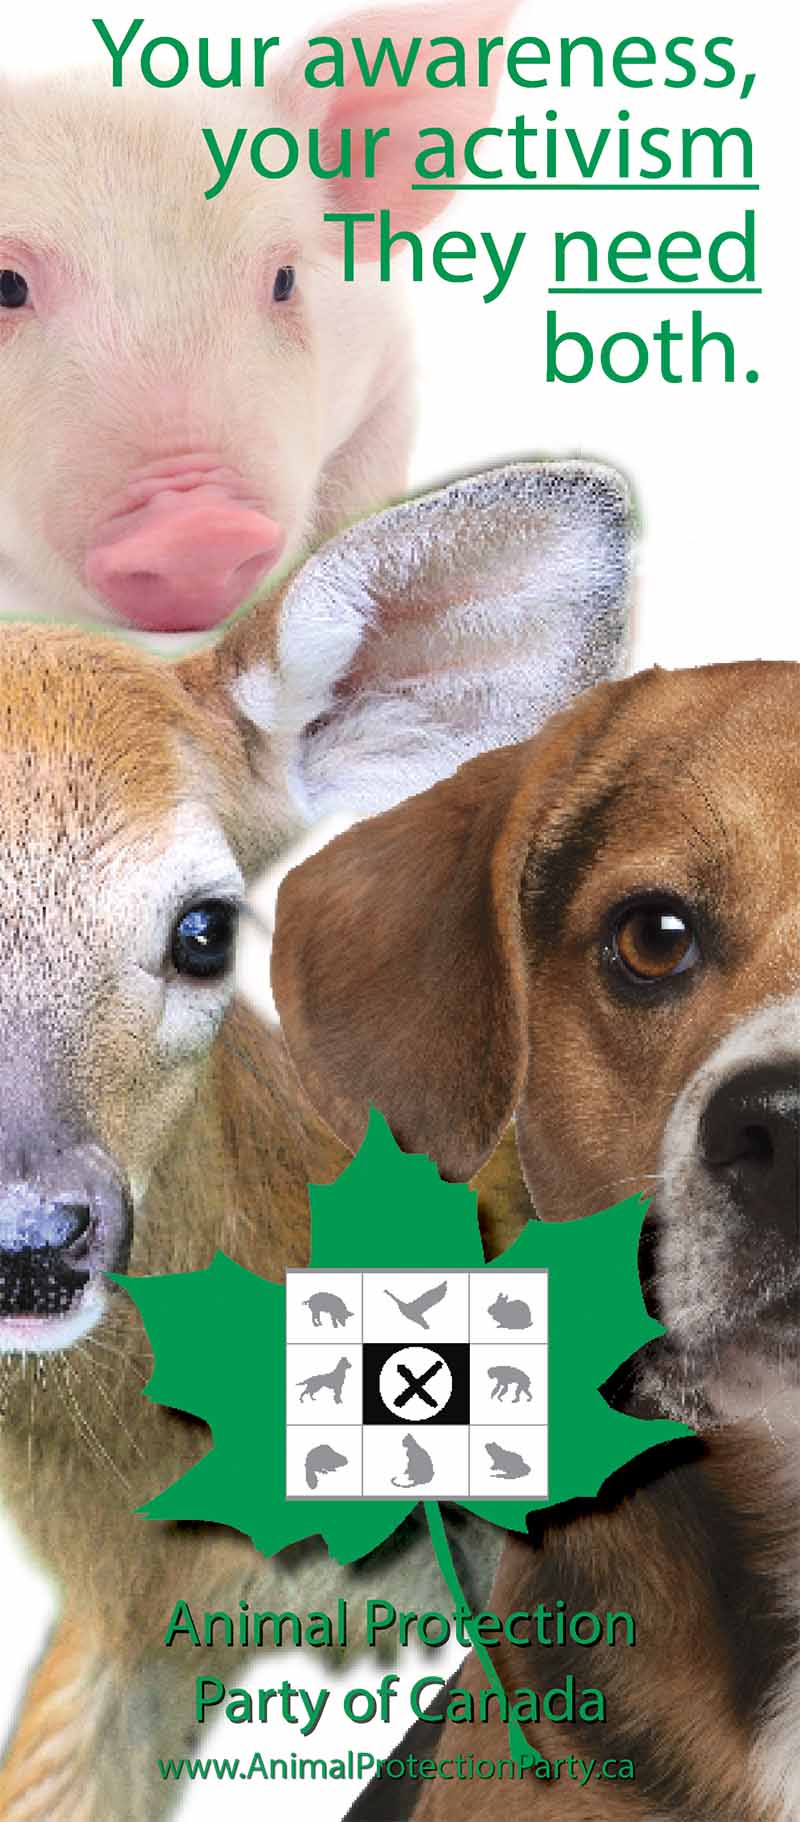 animal protection party of canada